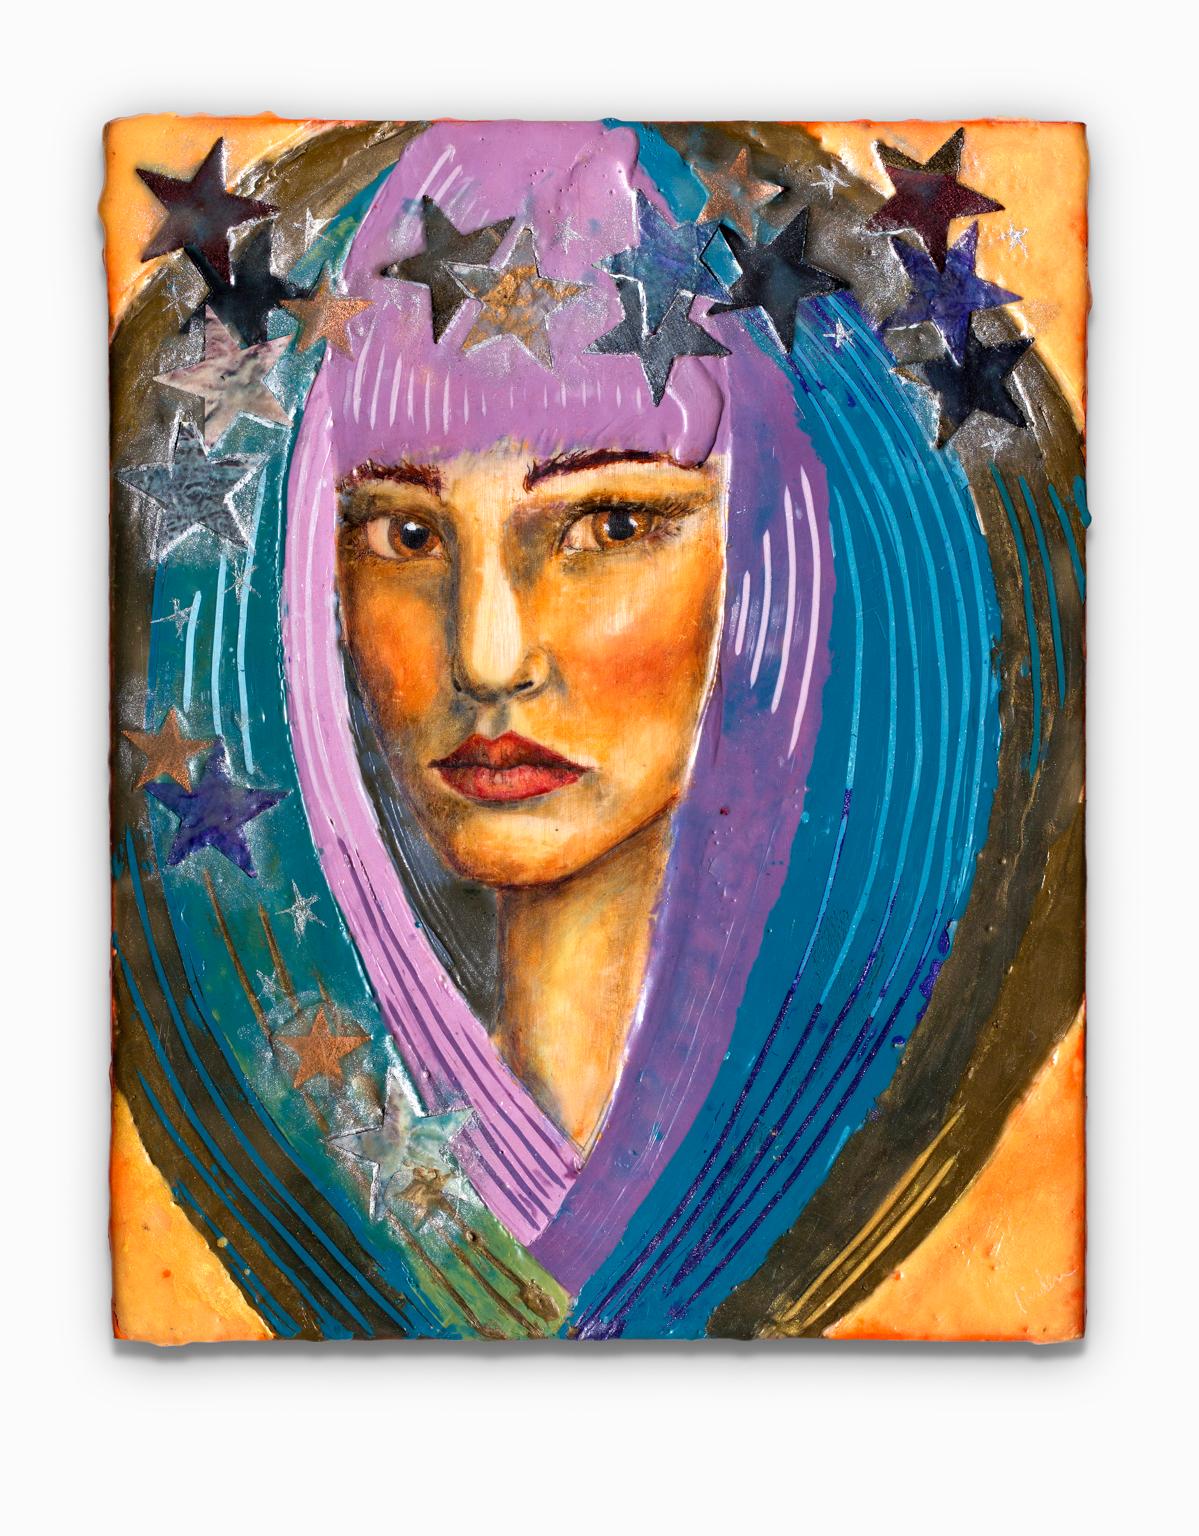 Linden Godlove Portrait Painting - "Muse of Deliberation", Encaustic, Oil, and Paper on Wood